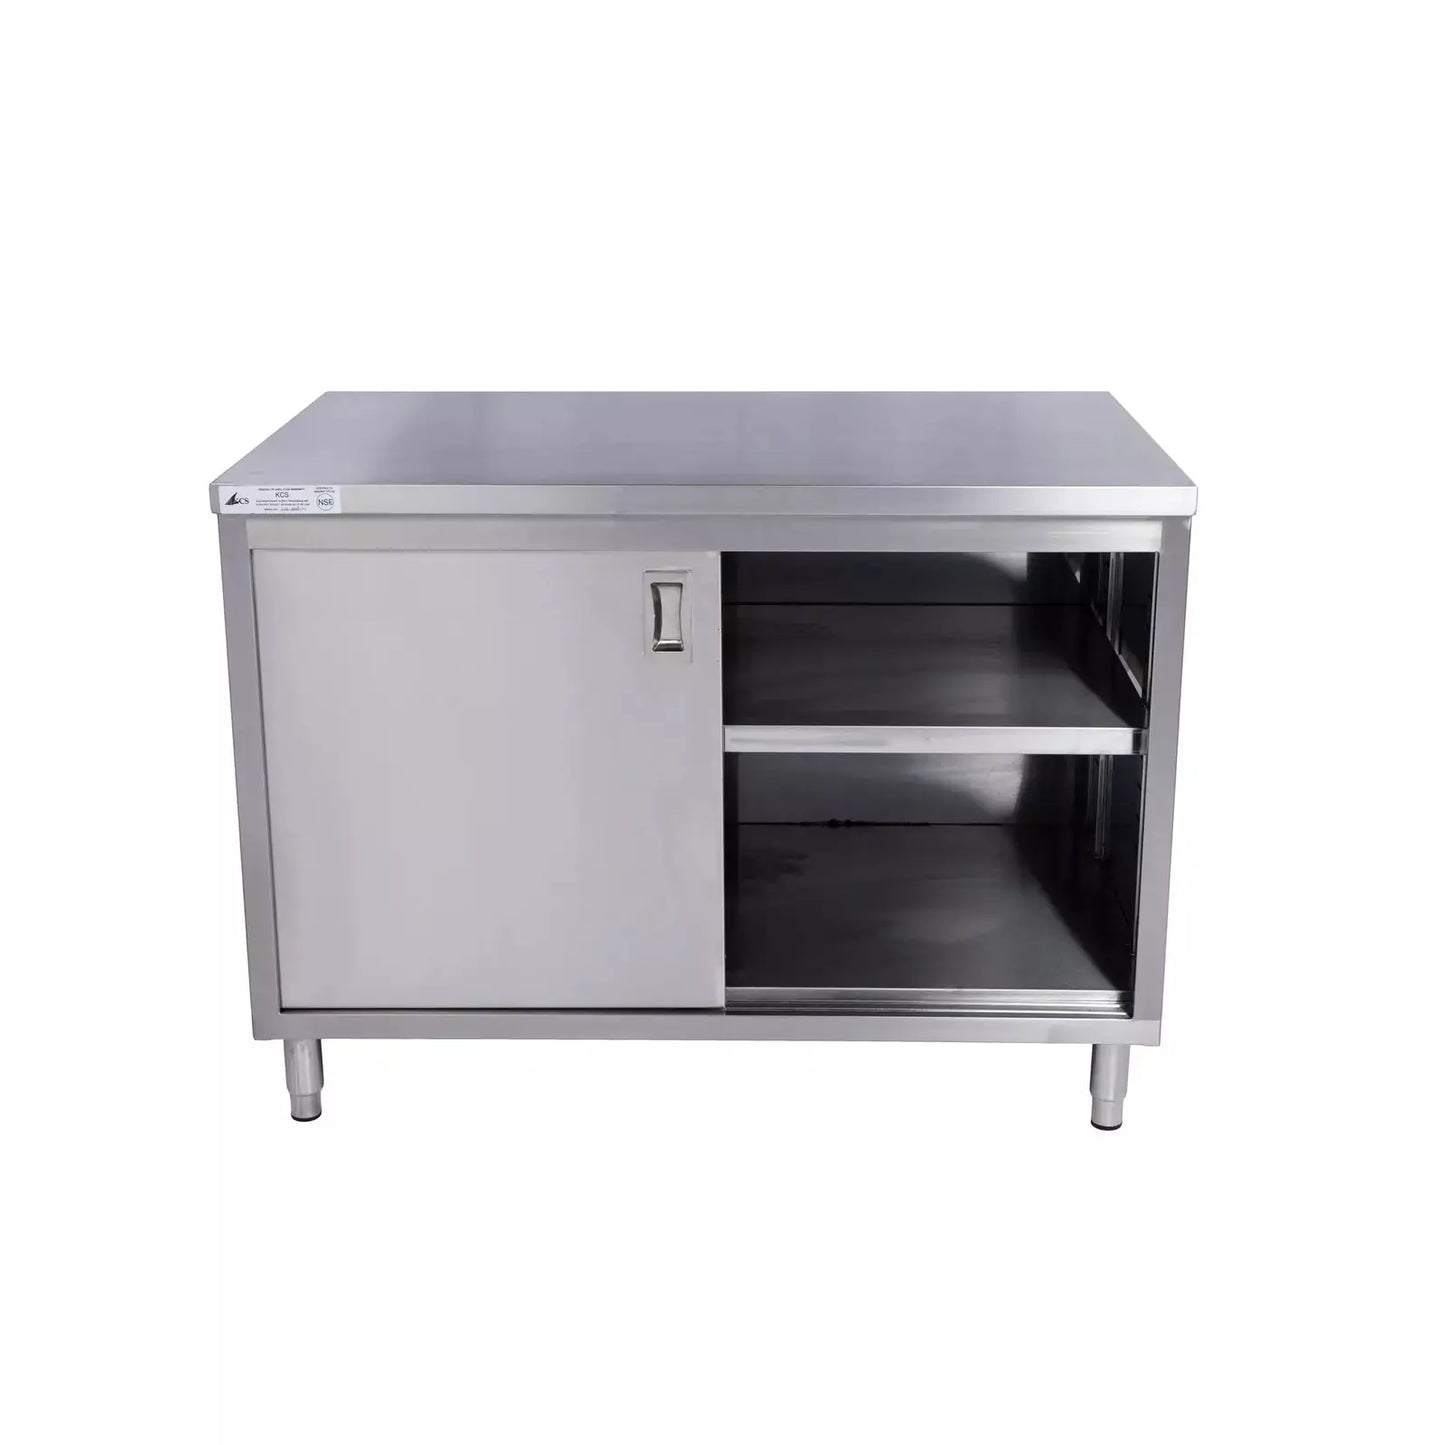 KCS CBS-3048 30" x 48" Stainless Steel Storage Welded Cabinet with 2 Sliding Doors